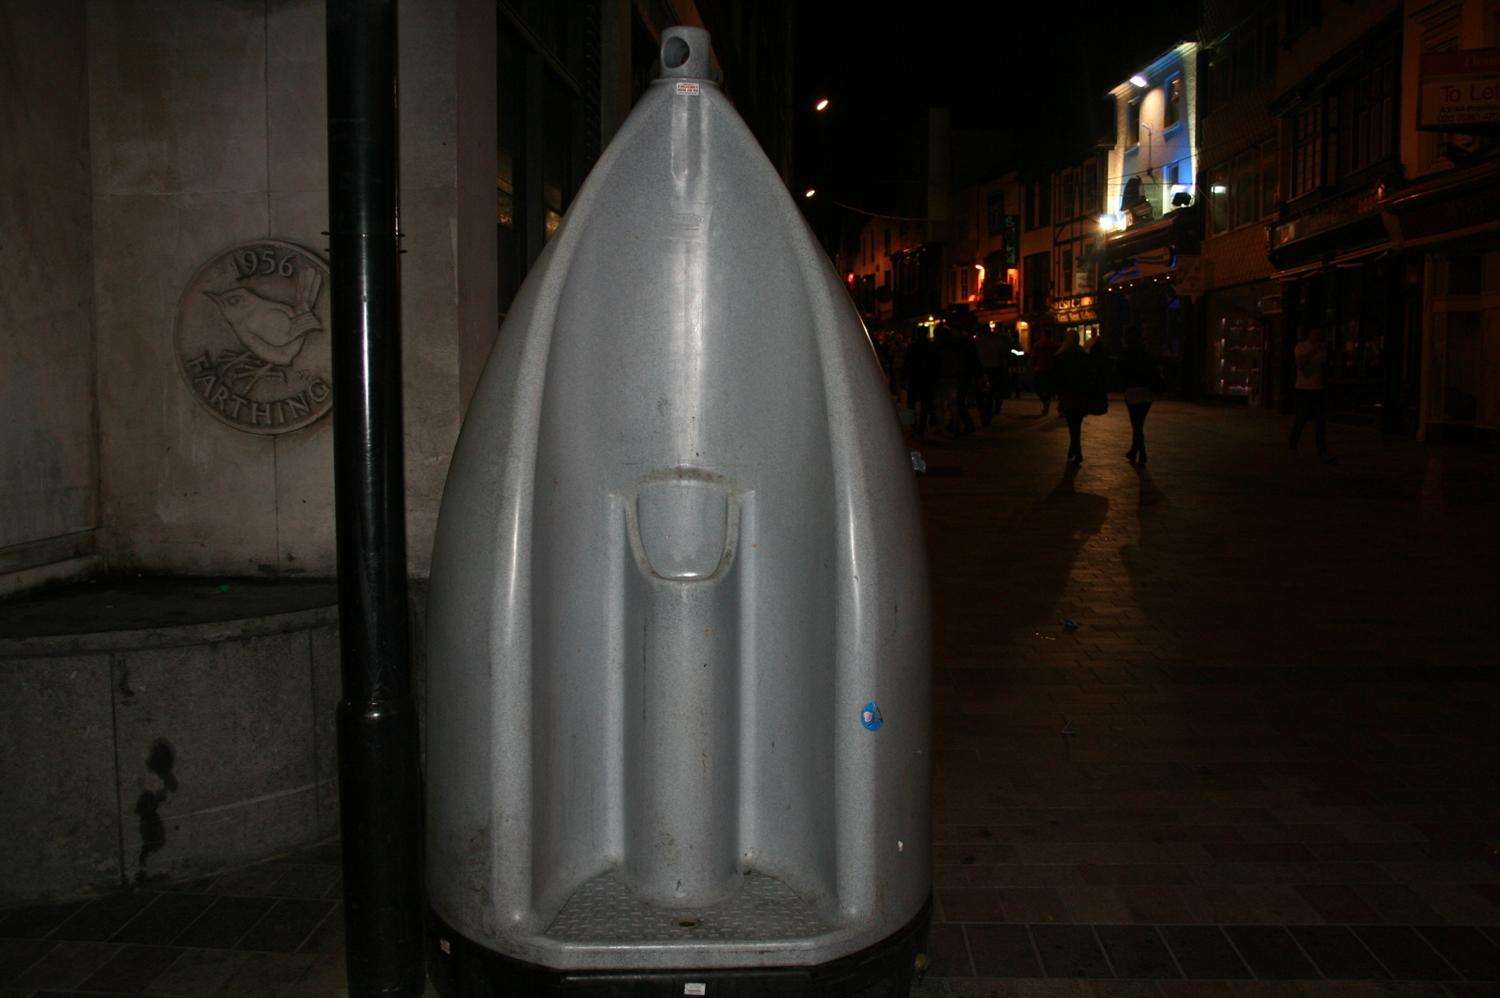 Male urinals will remain in place on Friday and Saturday nights in the town